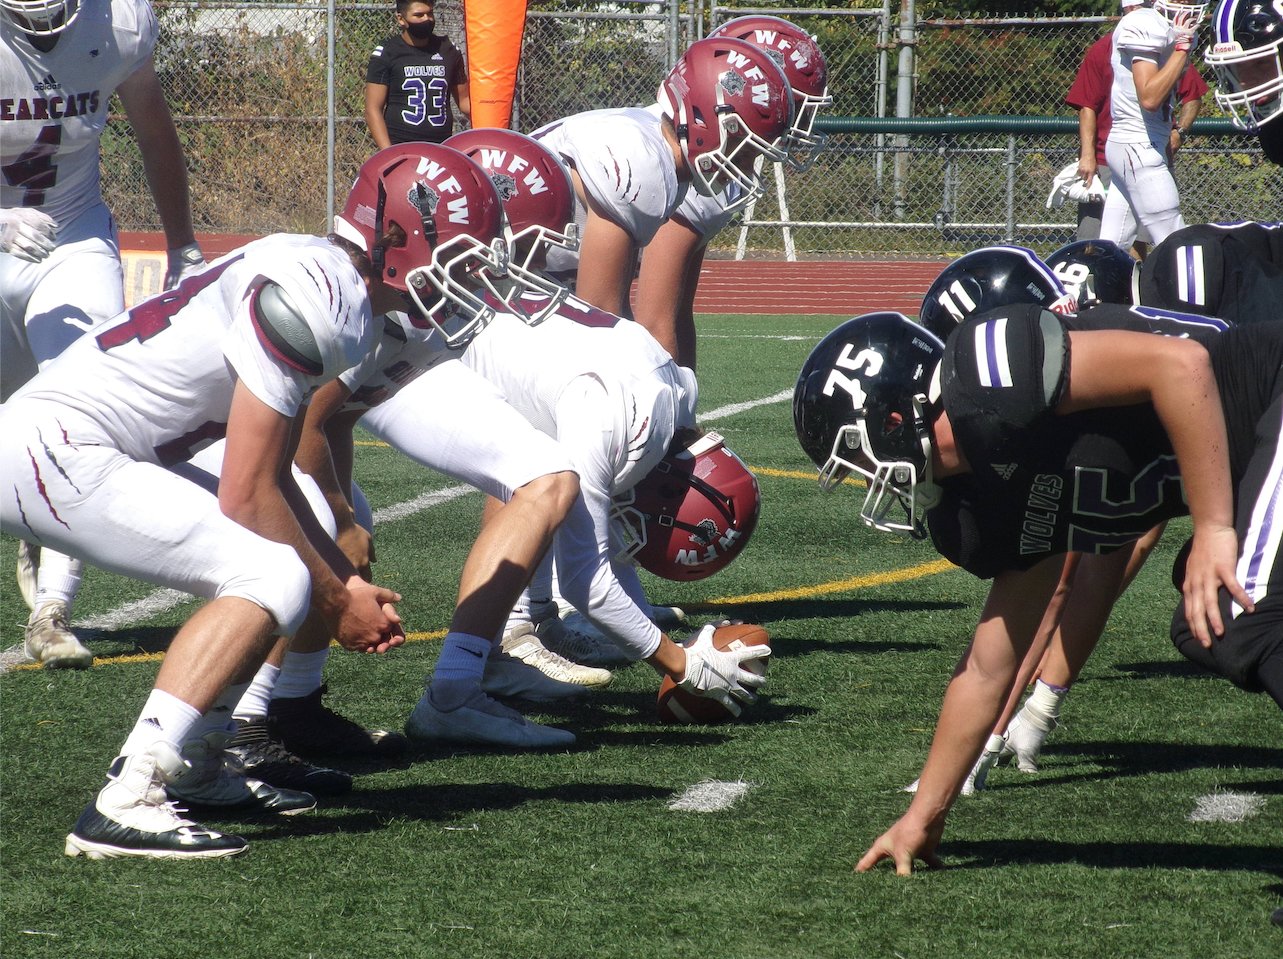 W.F. West's offense lines up to take on Heritage on Saturday in Vancouver.